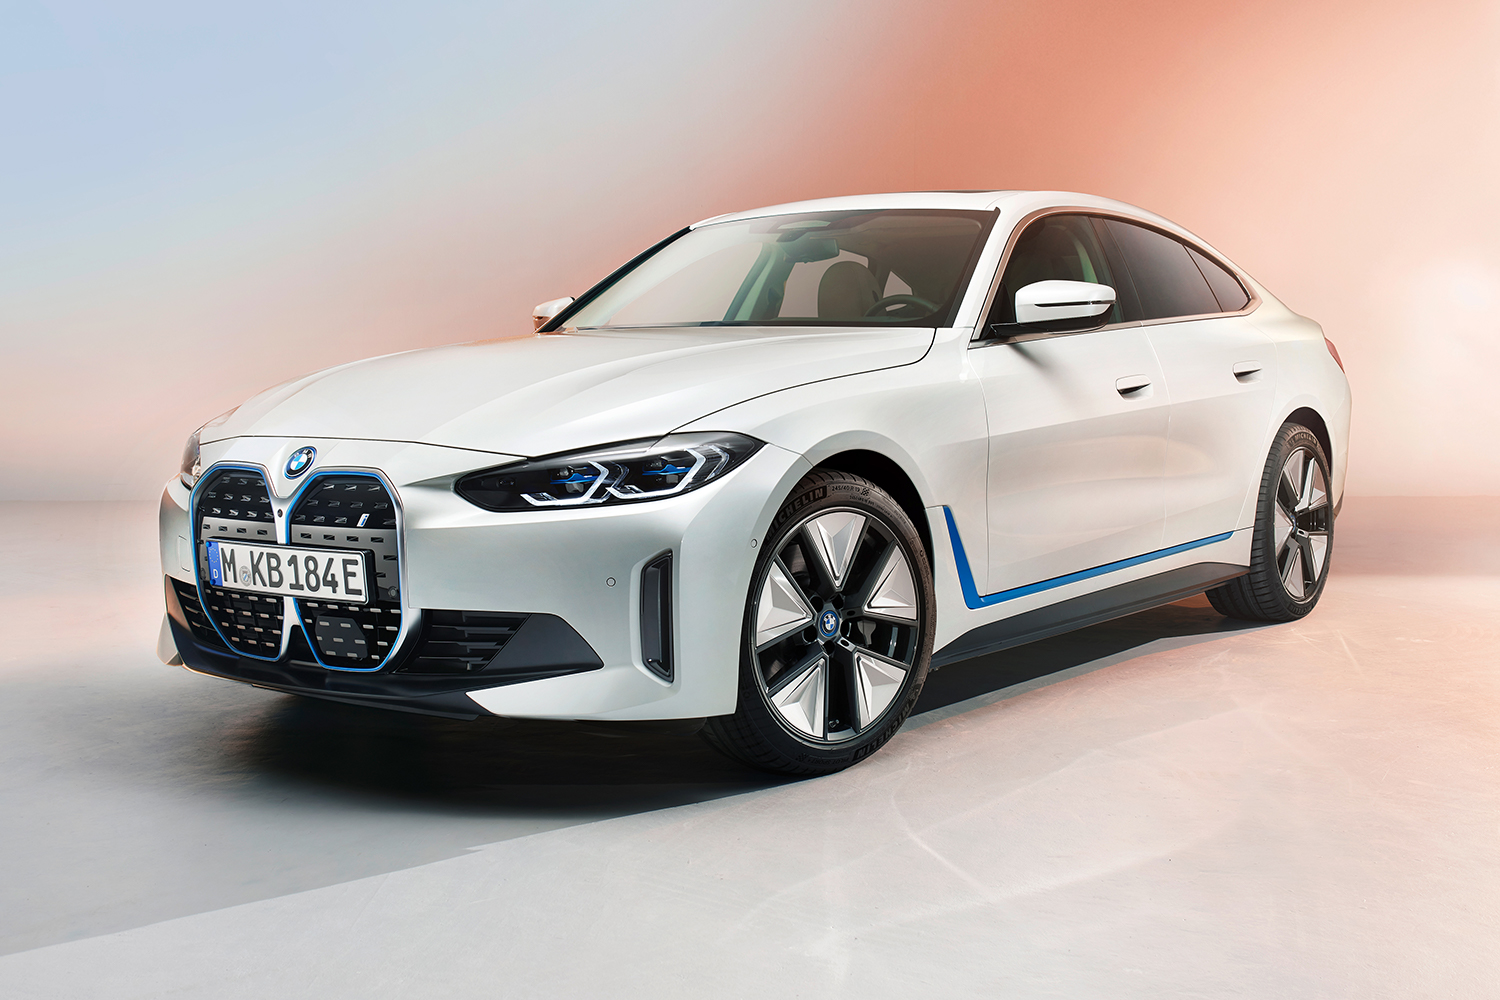 BMW's new i4 electric sedan shot from the front left